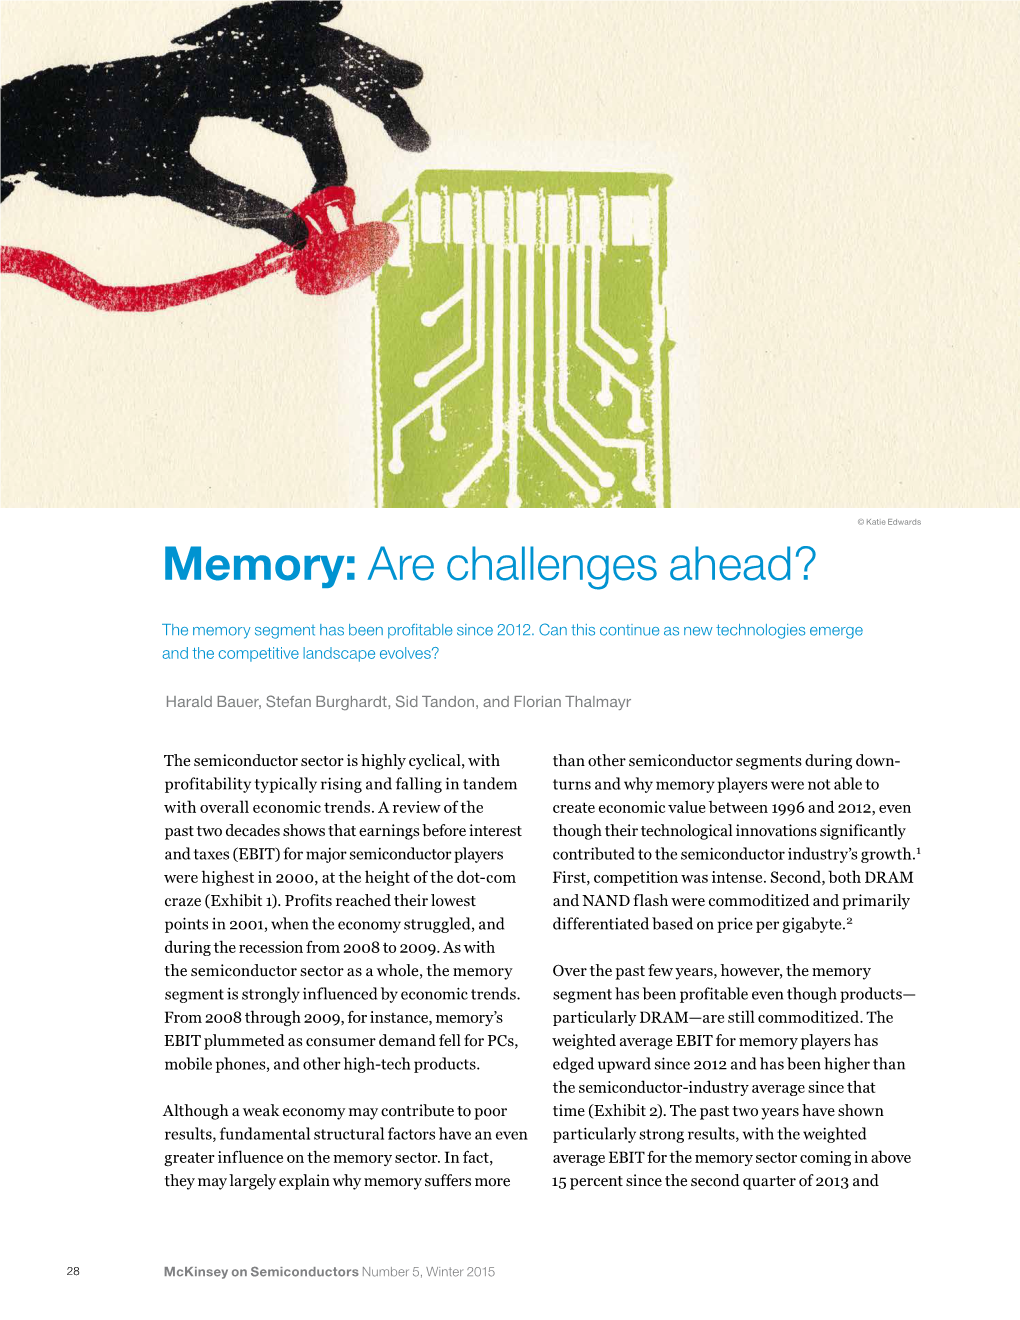 Memory: Are Challenges Ahead?